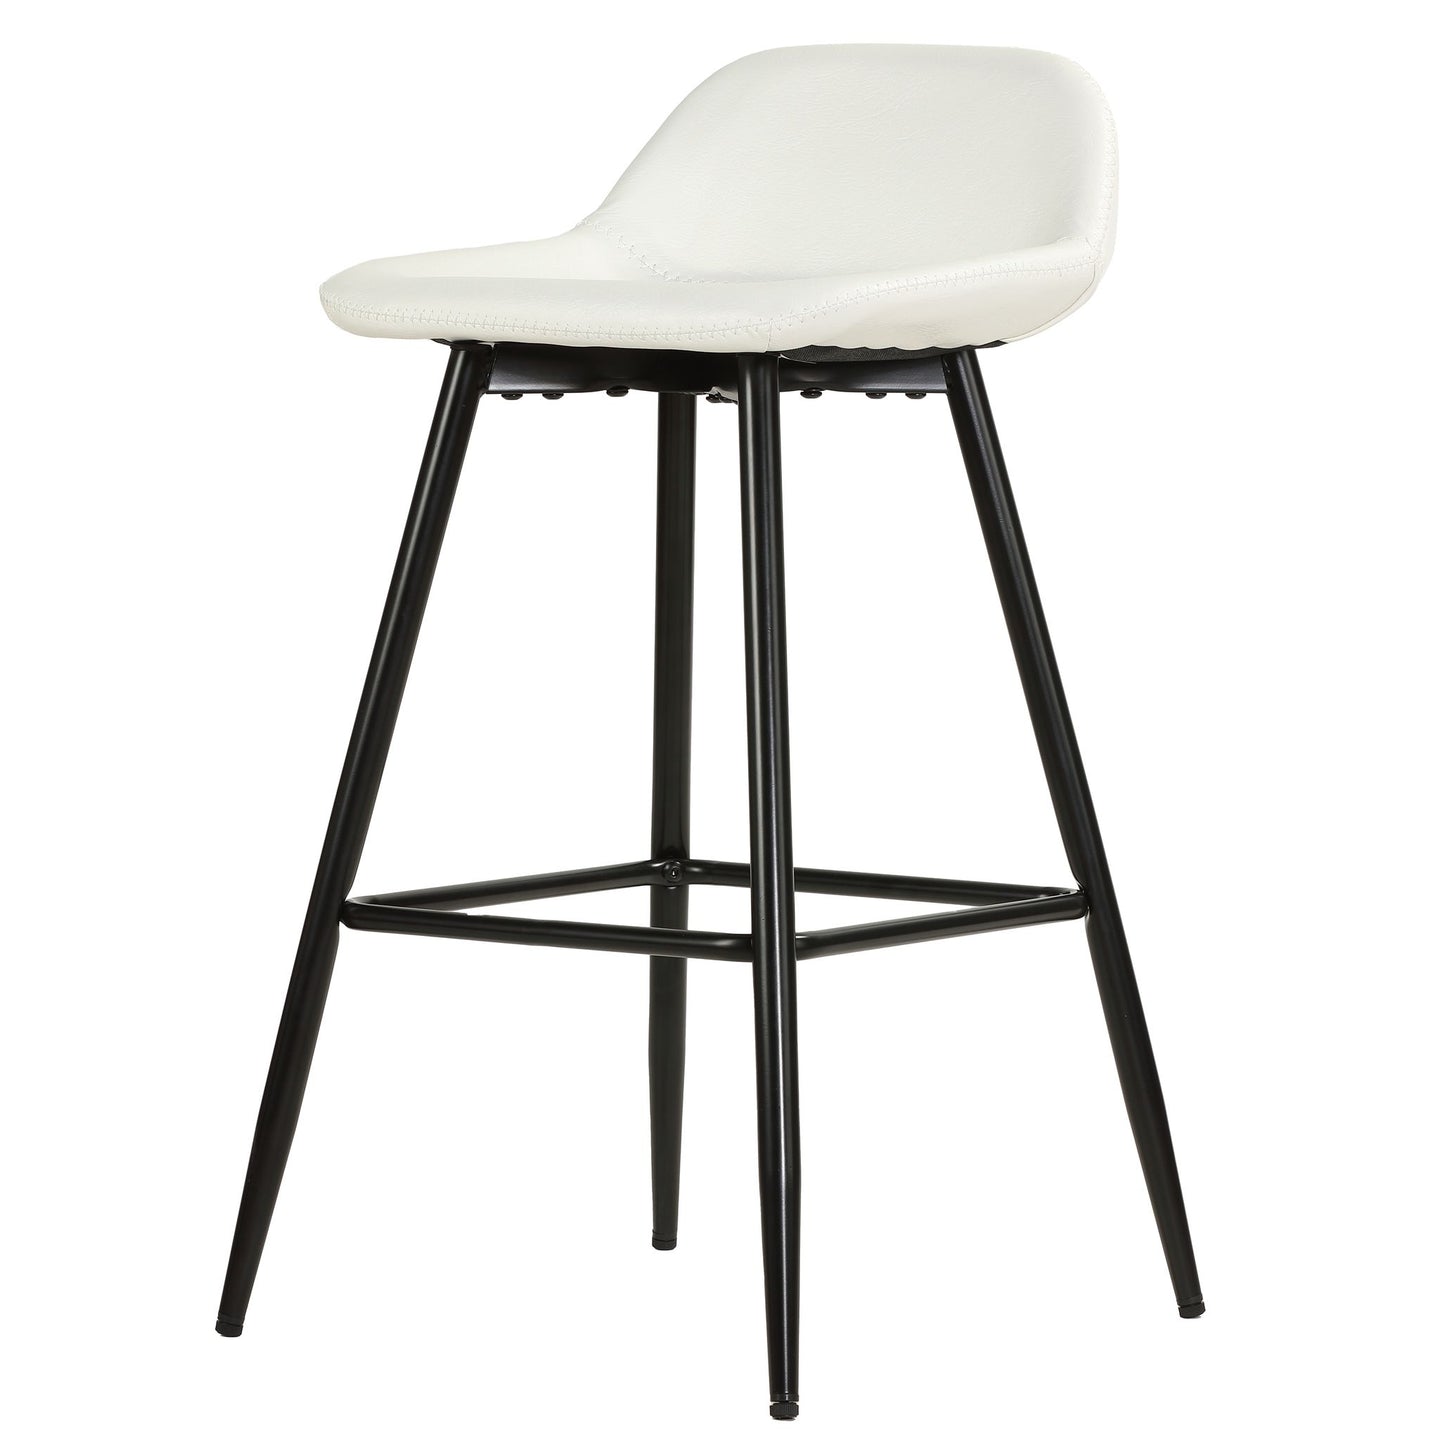 Cortesi Home Rain Counterstools in White Faux Leather, Black Base (Set of 2)